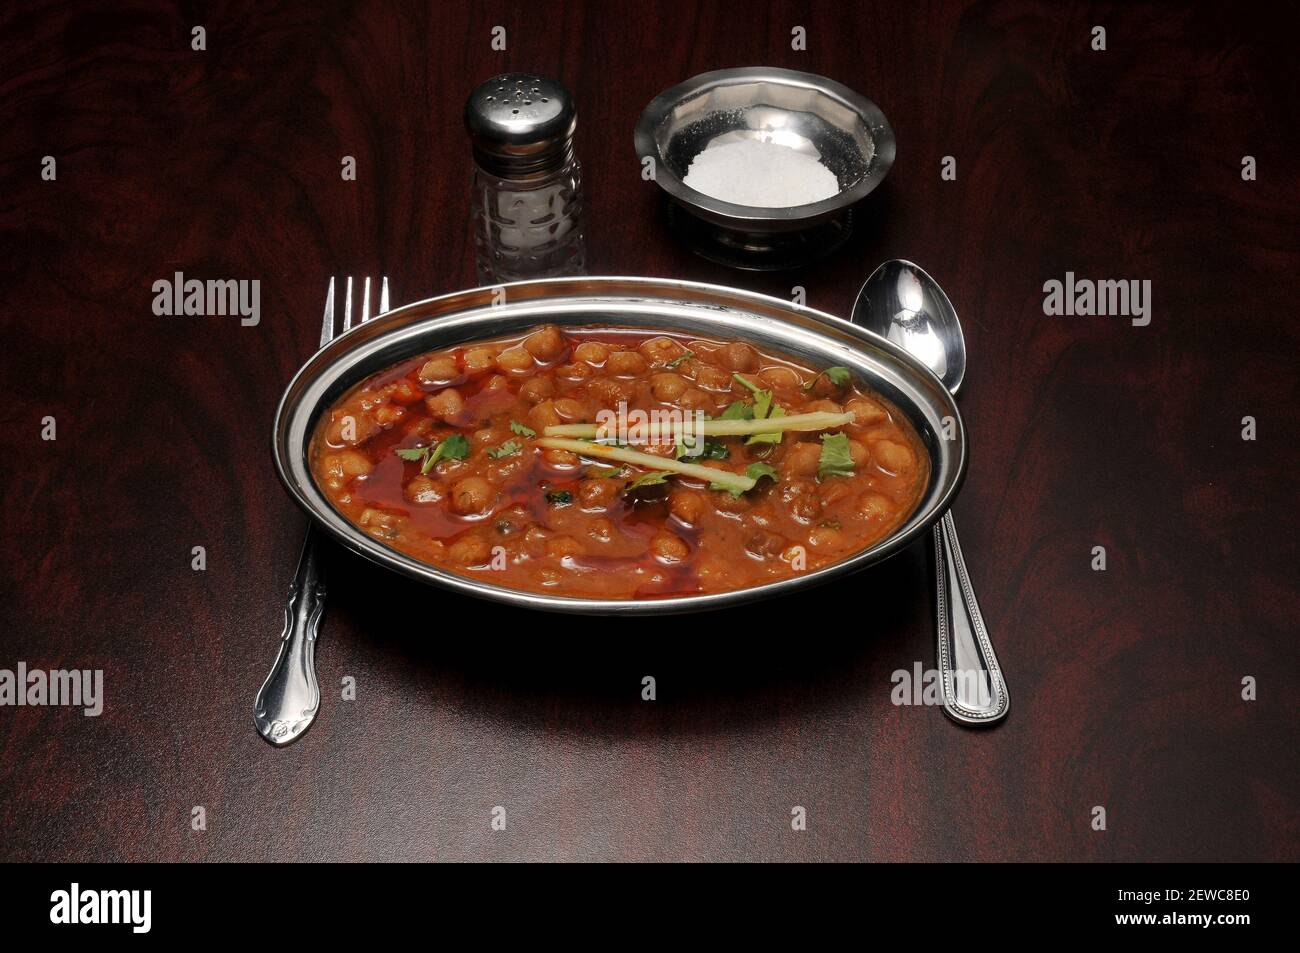 Authentic and traditional Indian cuisine food known as chana masala Stock Photo